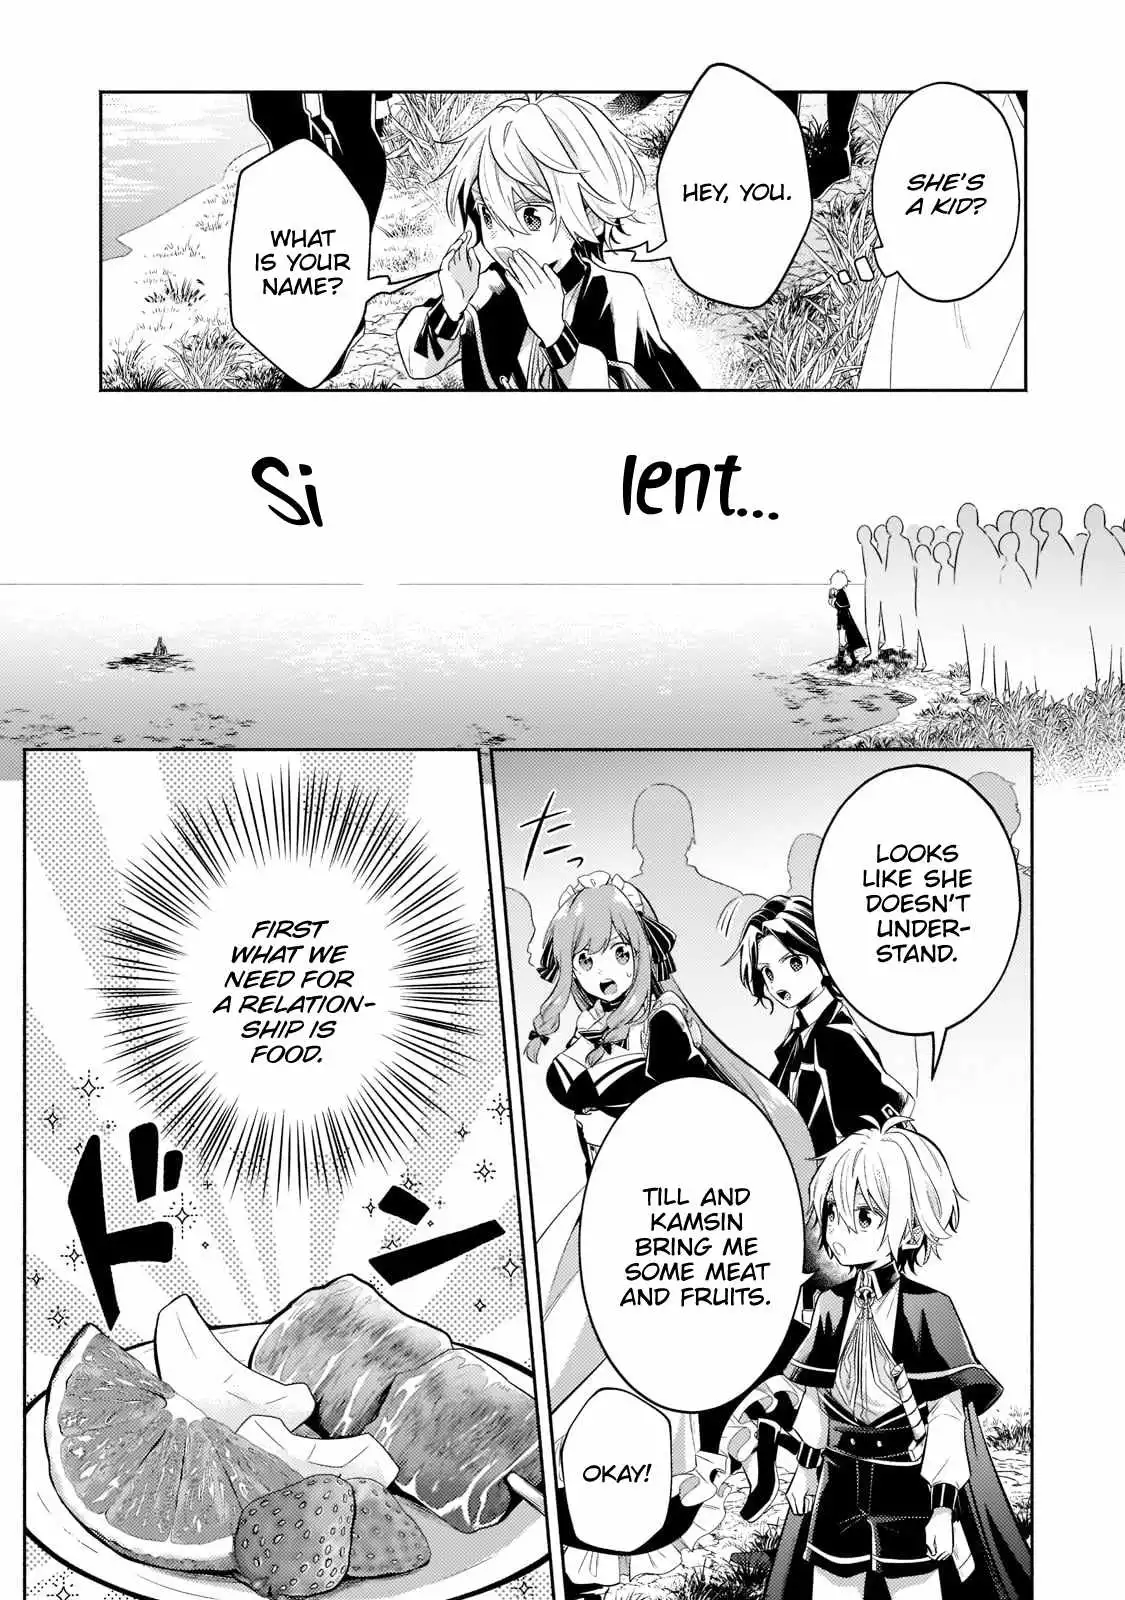 Fun Territory Defense by the Optimistic Lord Chapter 15.1